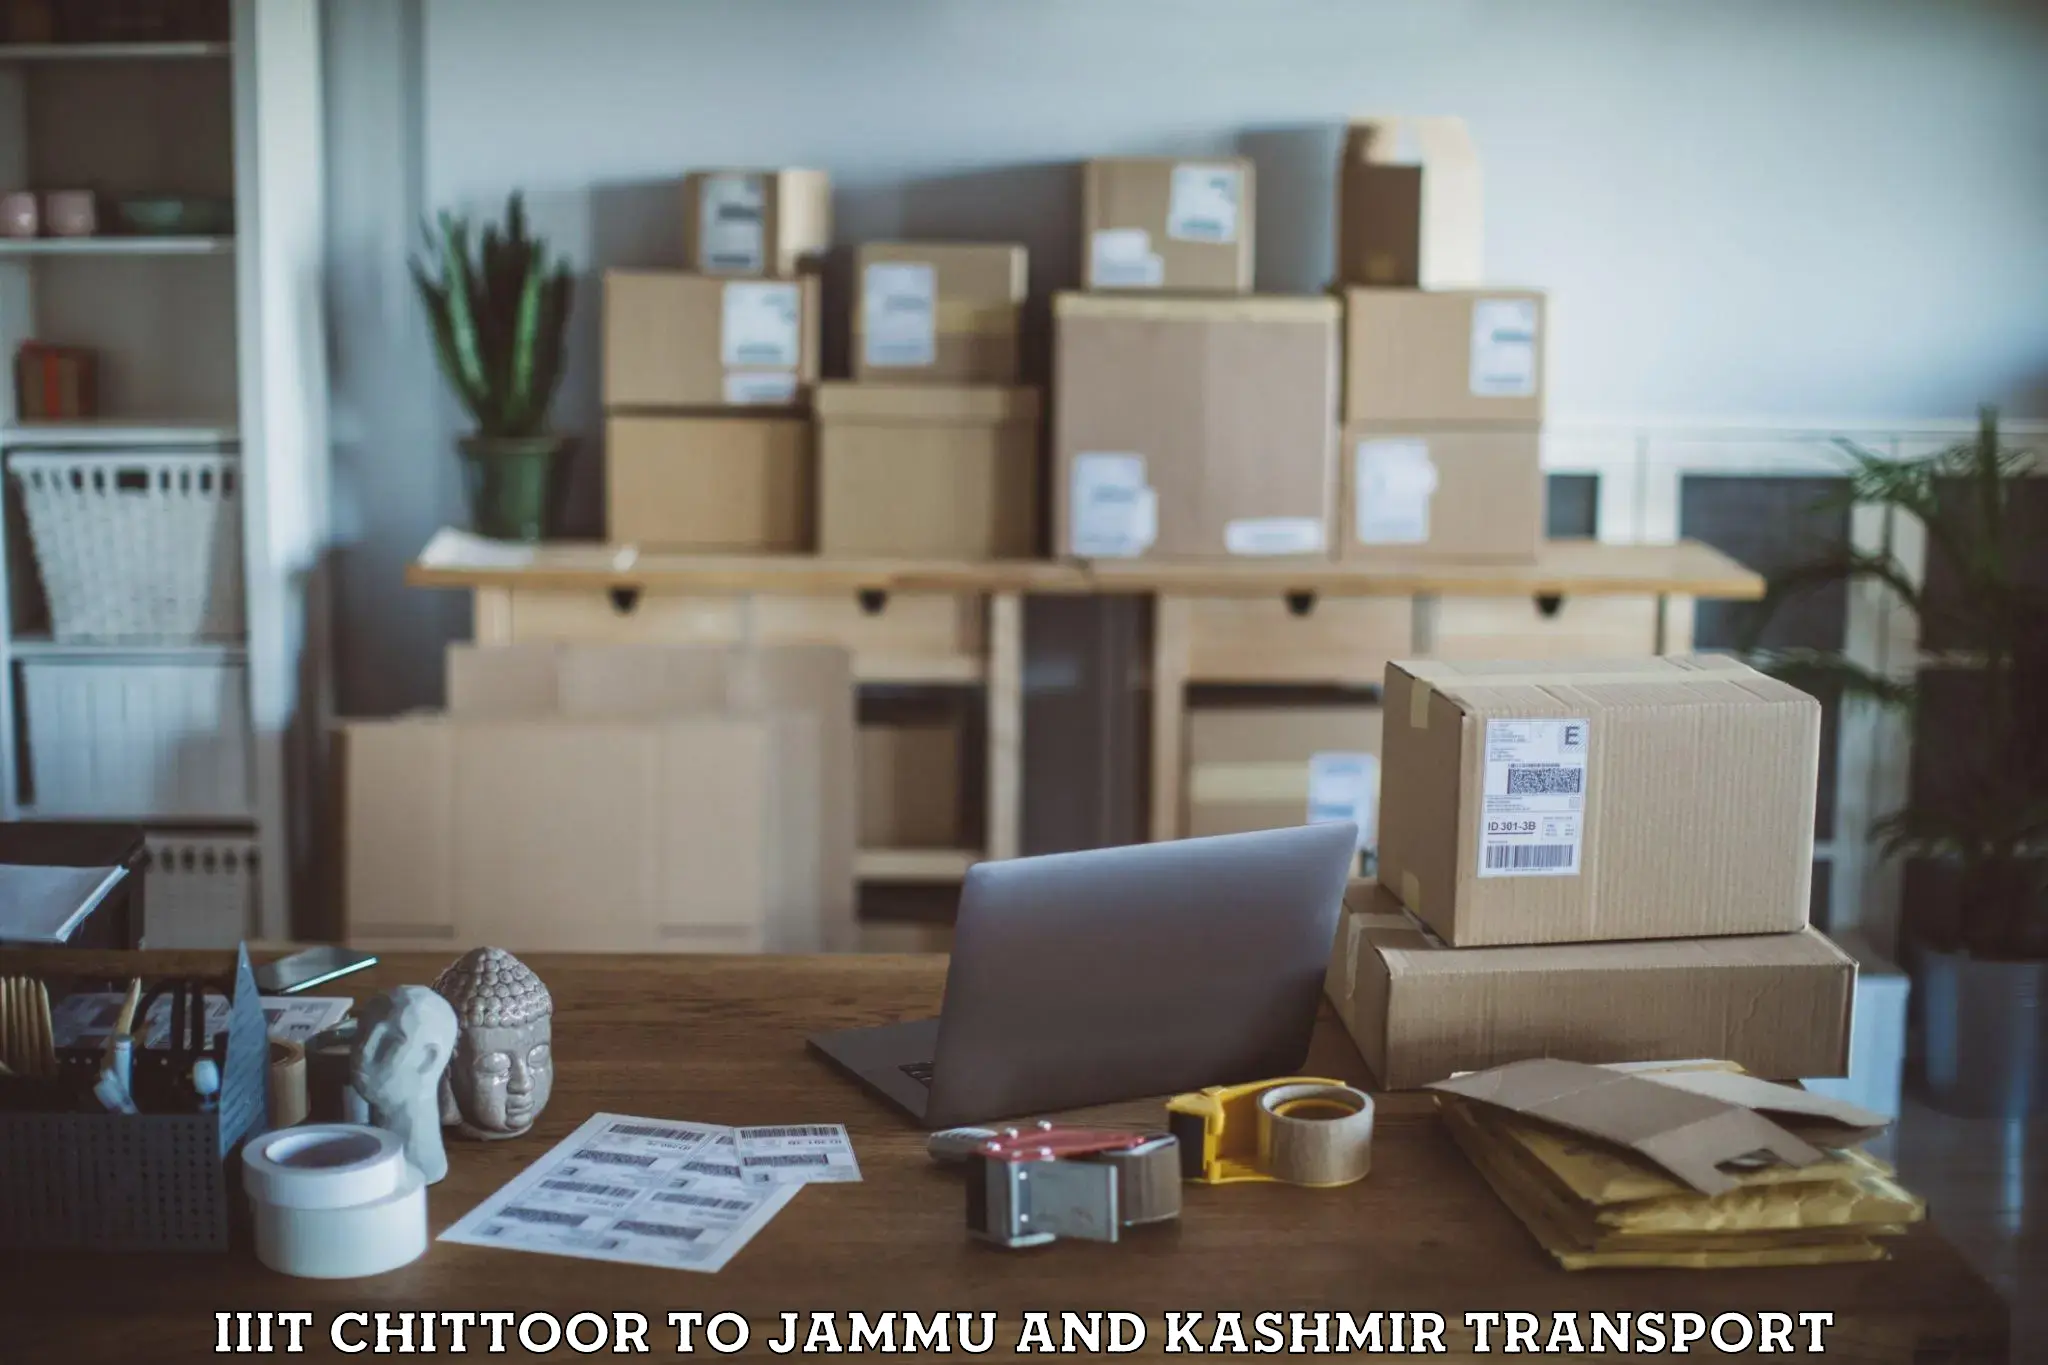 Transportation solution services IIIT Chittoor to Jammu and Kashmir